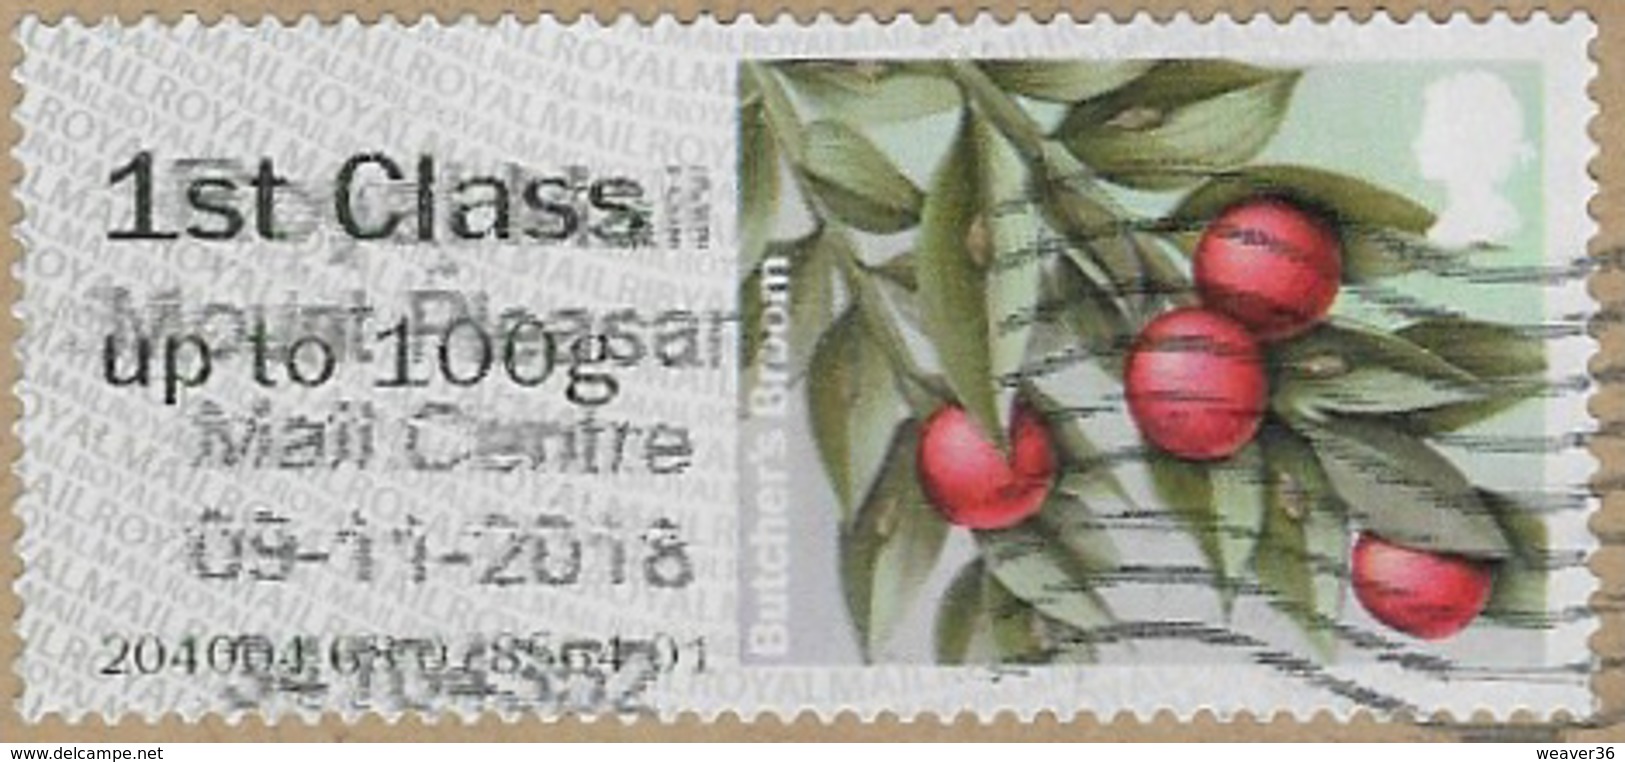 GB 2014 Winter Greenery 1st Type 4 Used Issuing Office 204004 [32/173/ND] - Post & Go Stamps